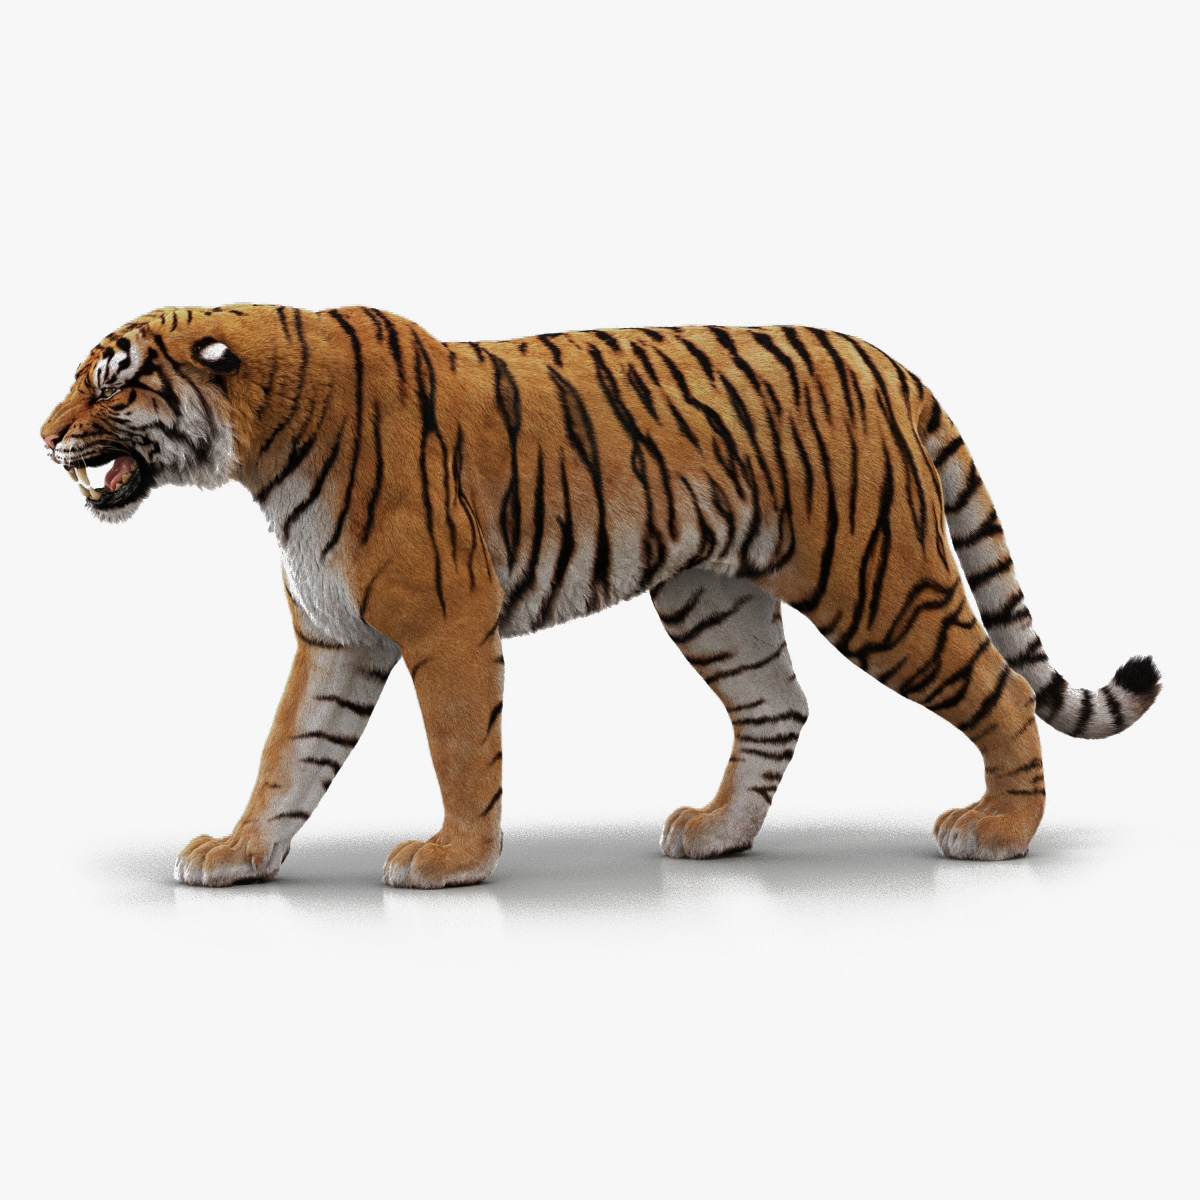 Animated Bengal tiger 3D model